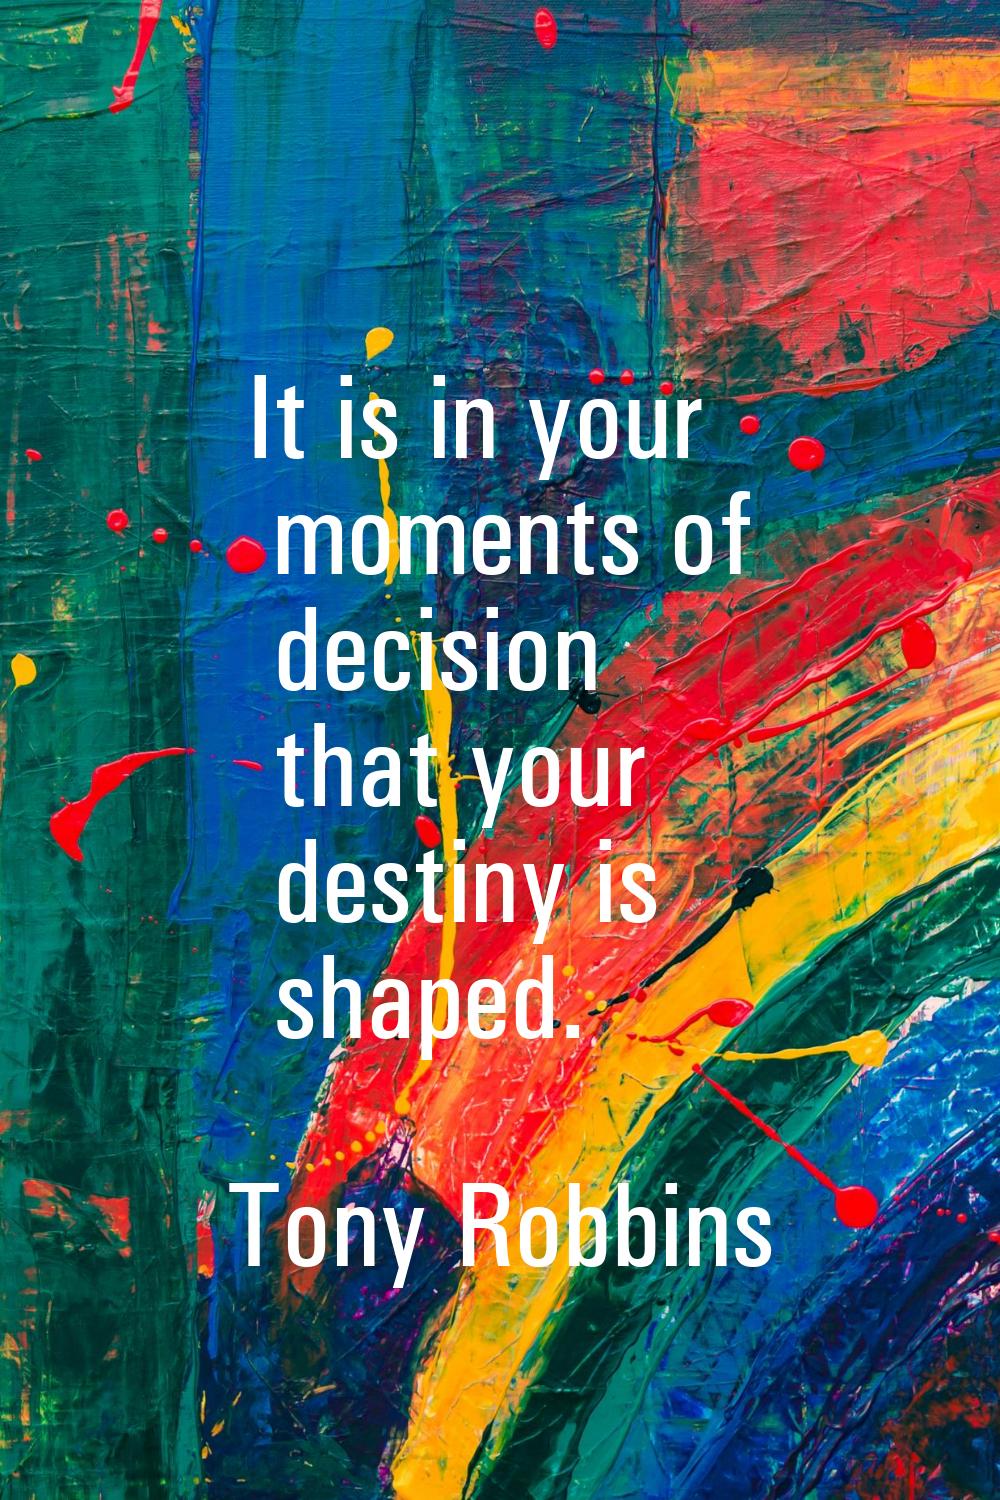 It is in your moments of decision that your destiny is shaped.